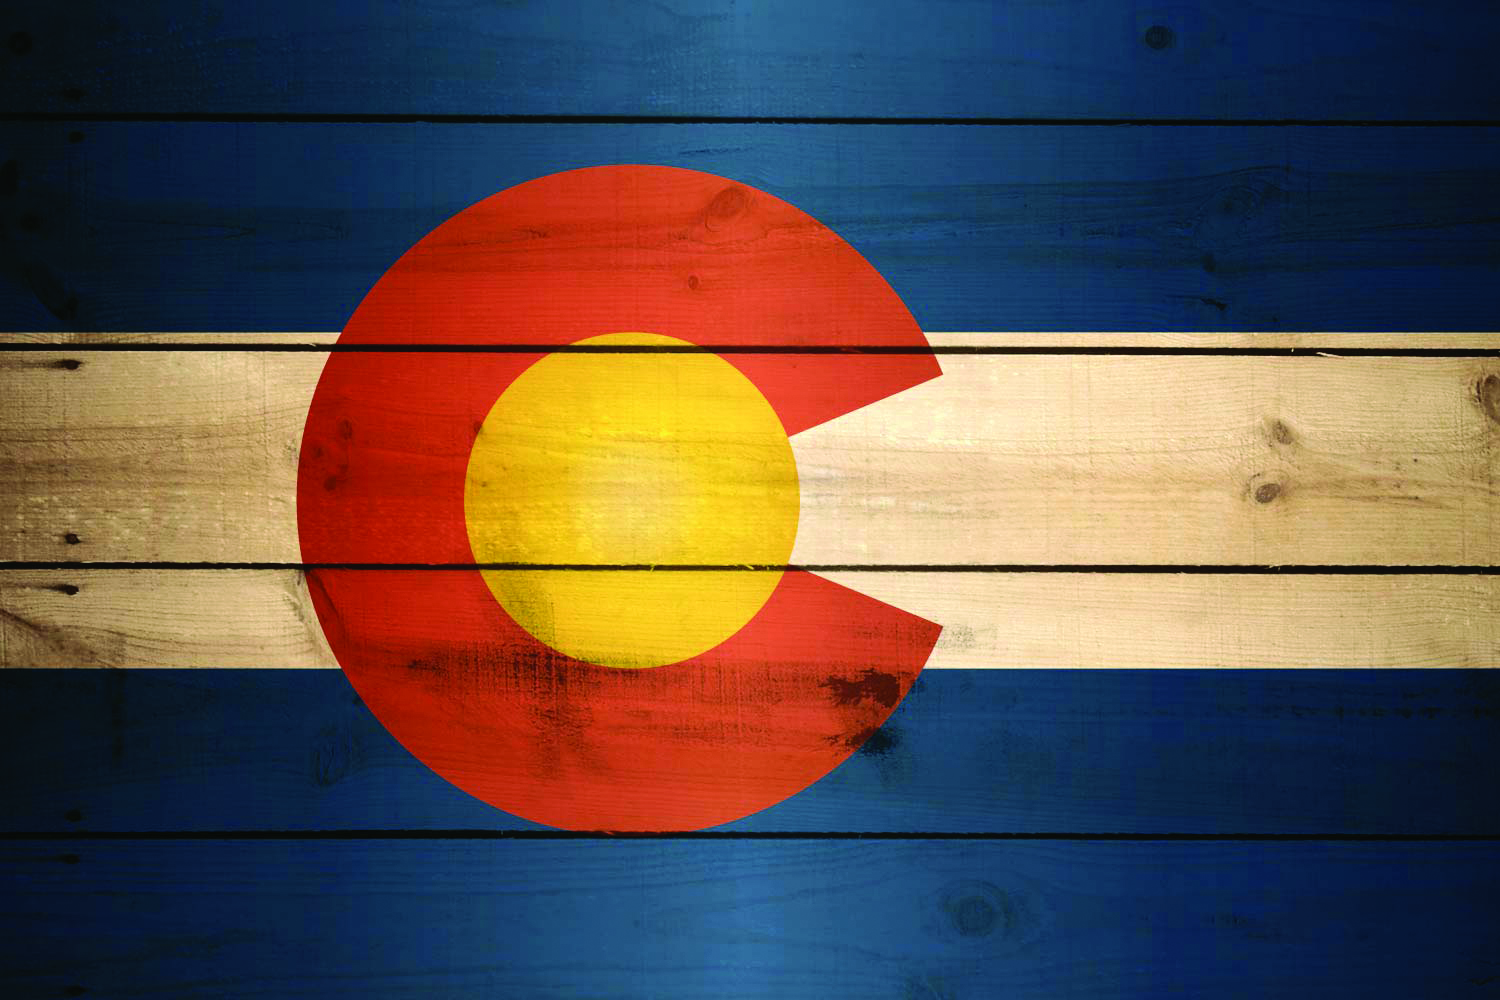 state of colorado takes action on labor shortage